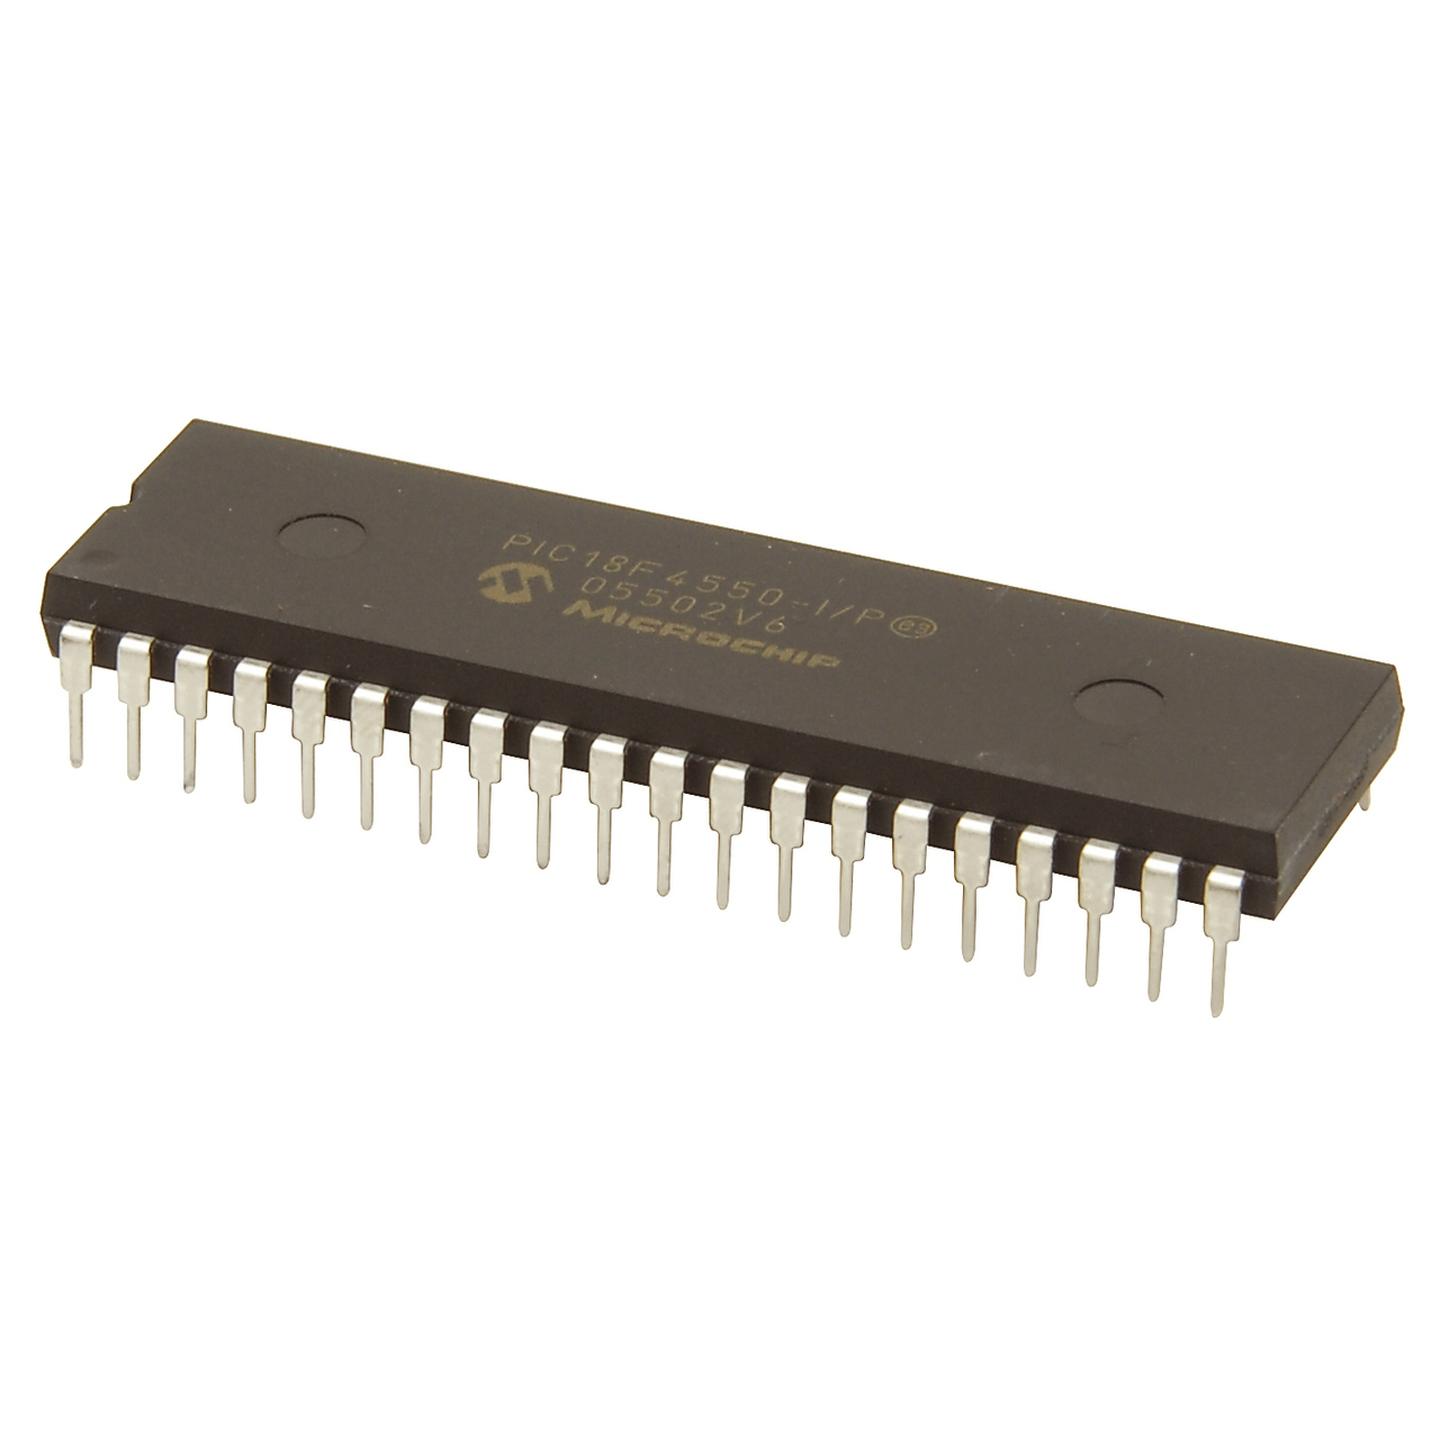 PIC18F4550 Microcontroller with USB Interface